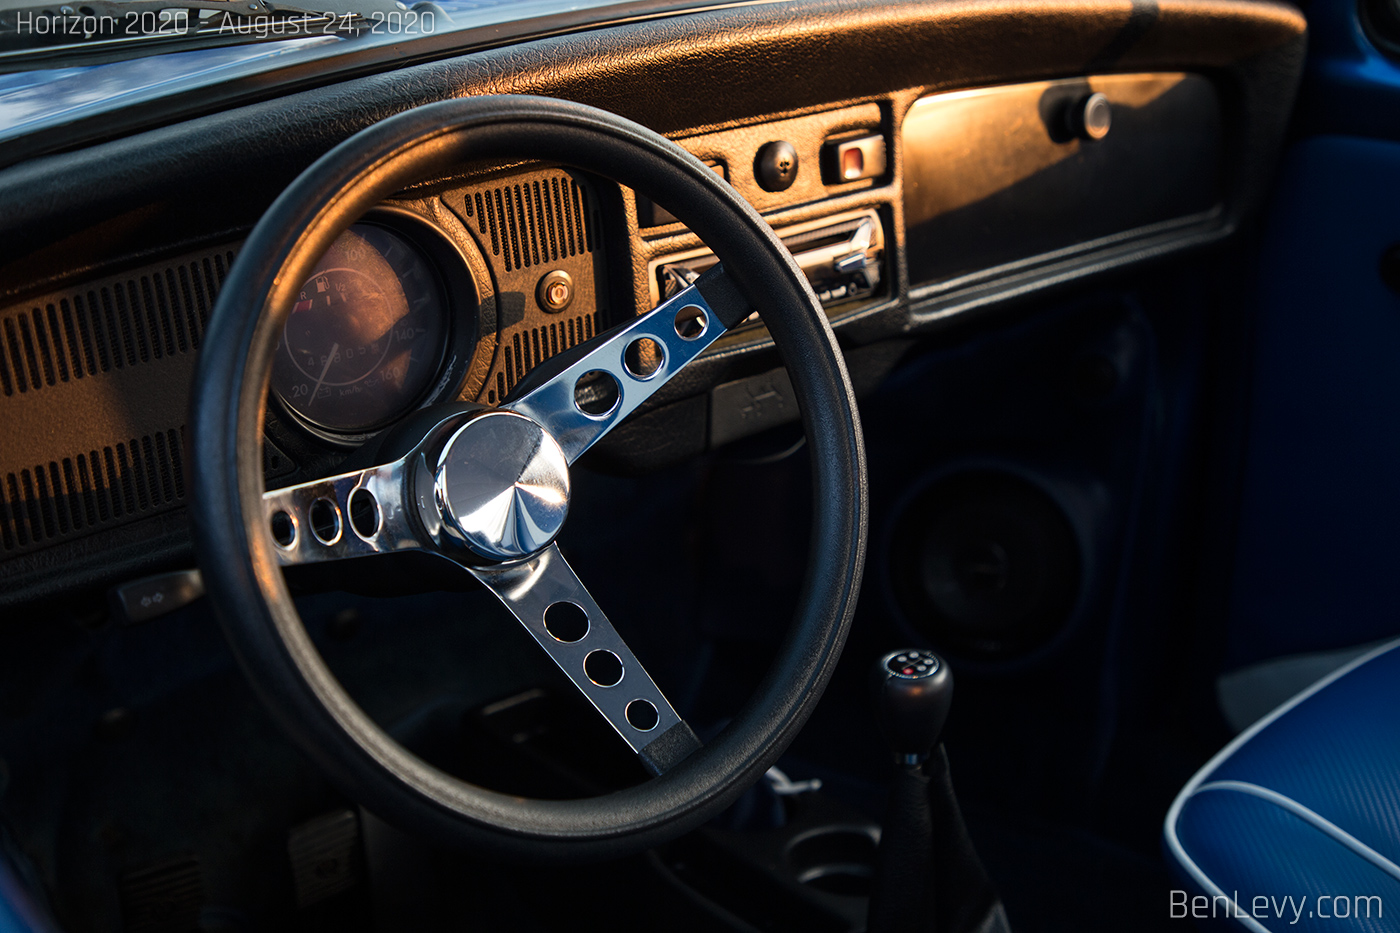 The sparse dashboard in a Volkswagen Beetle